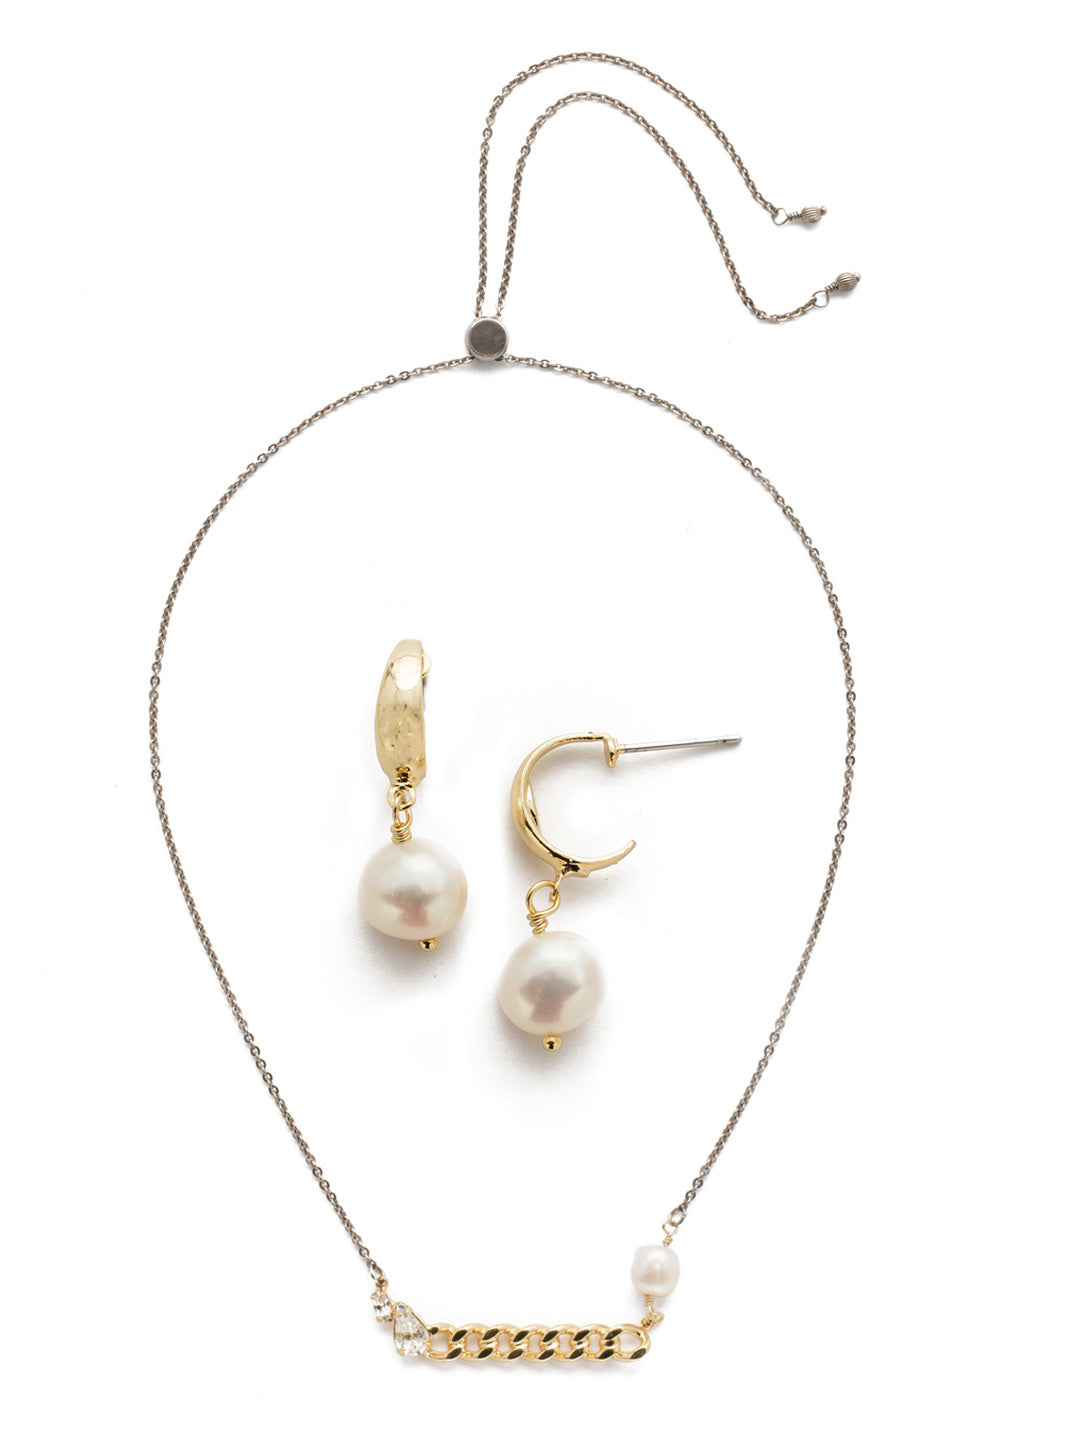 Sela Necklace/Earring Gift Set - GCT110BGMDP - <p>Our Sela gift set has a accent pearl in the necklace and earring set perfect for a date night out. From Sorrelli's Modern Pearl collection in our Bright Gold-tone finish.</p>